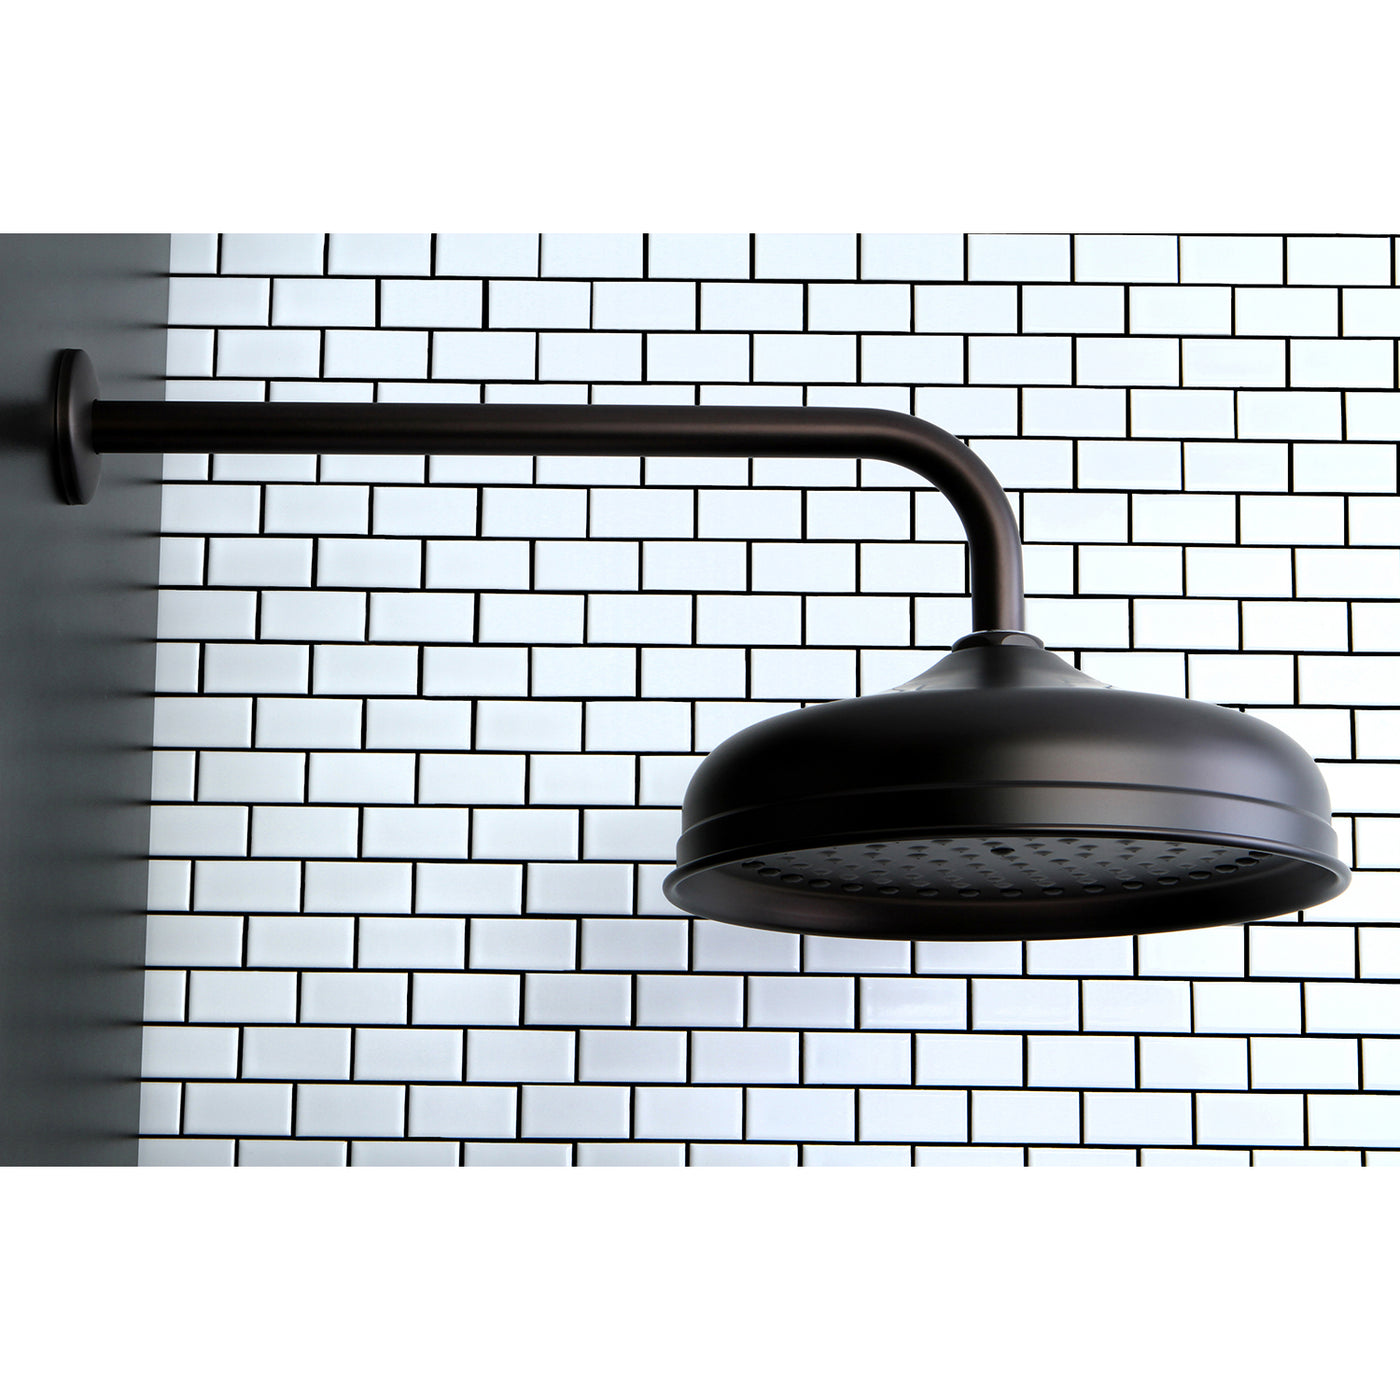 Elements of Design DK225K25 10-Inch Showerhead with 17-Inch Ceiling Mounted Shower Arm, Oil Rubbed Bronze